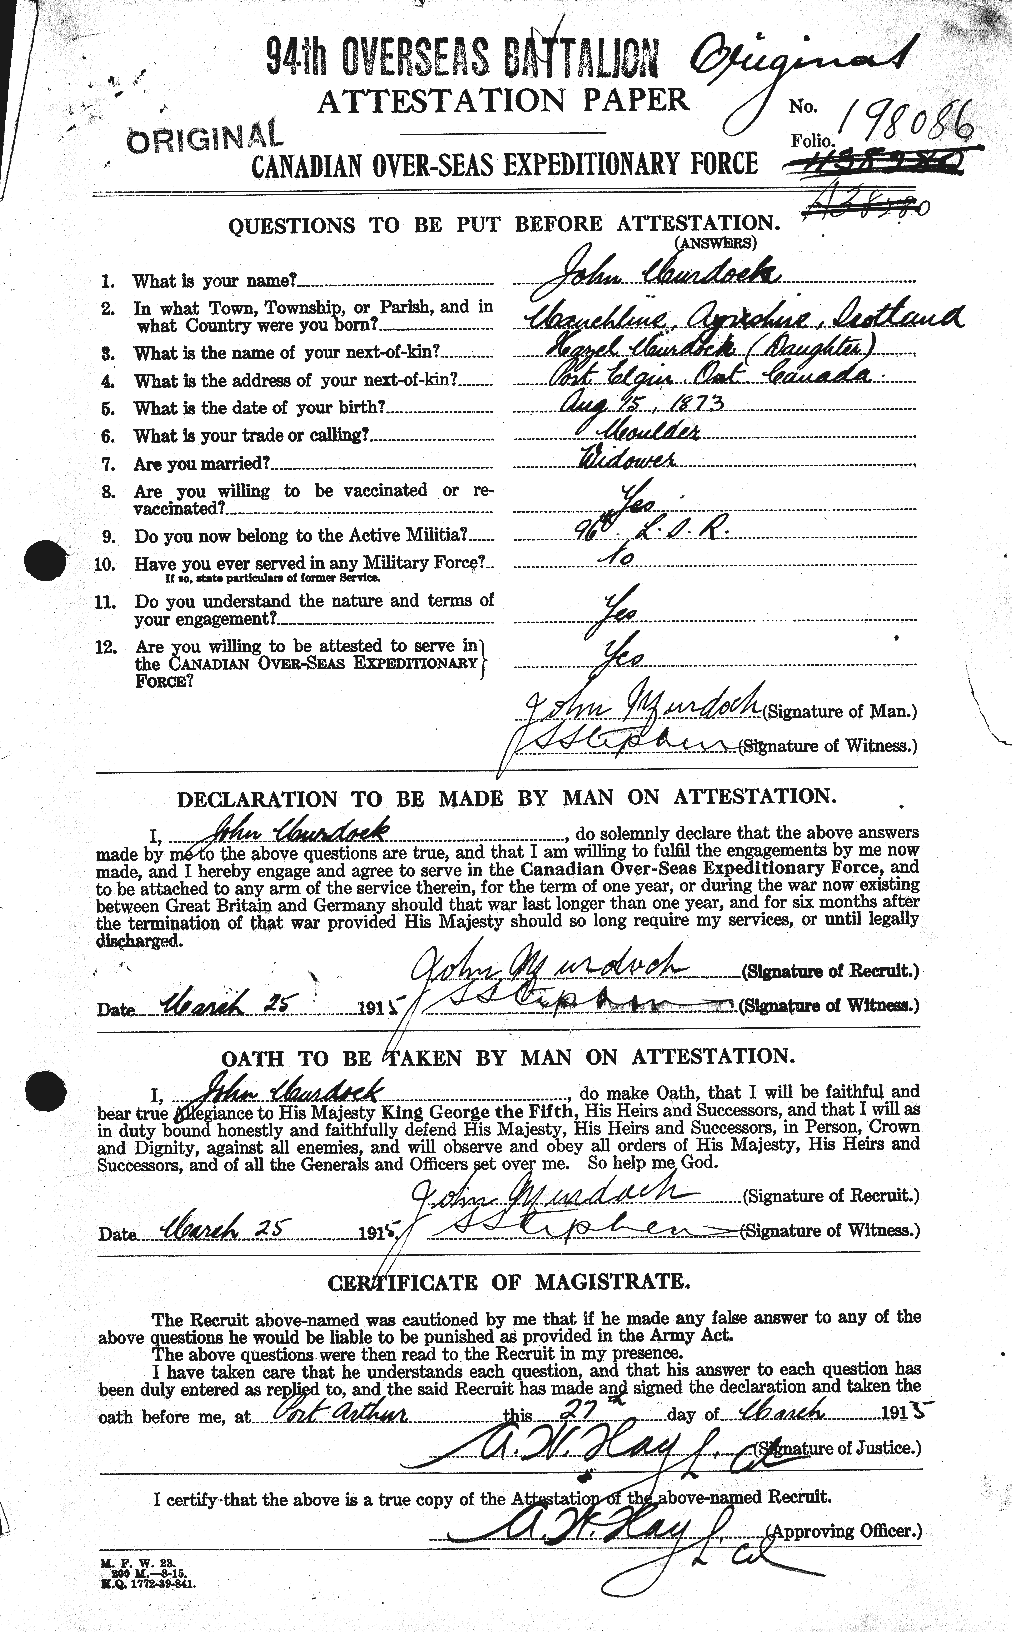 Personnel Records of the First World War - CEF 510856a